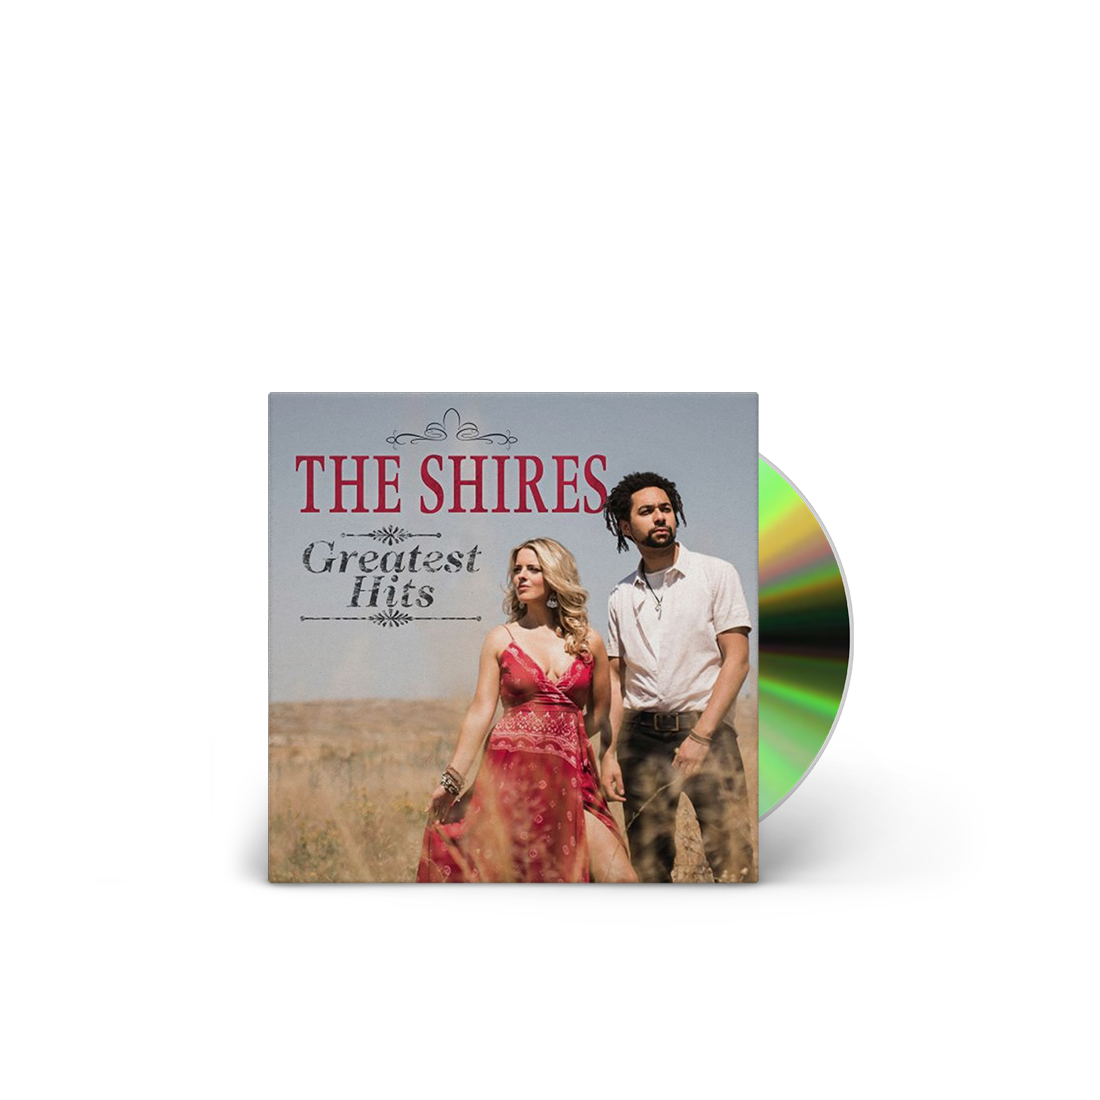 The Shires Greatest Hits